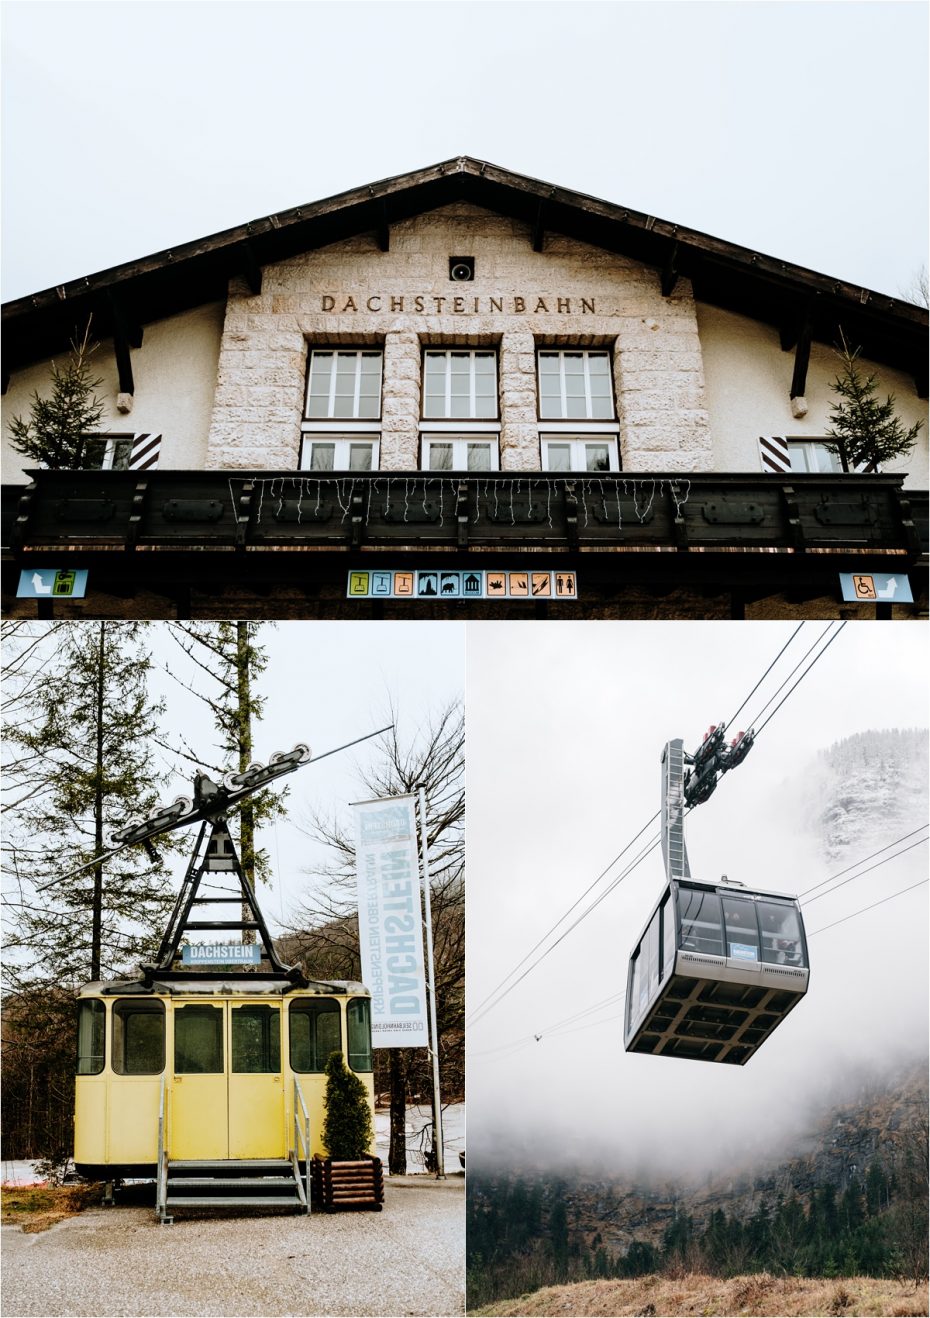 Dachsteinbahn cable car in Obertraun. Photos by Wild Connections Photography